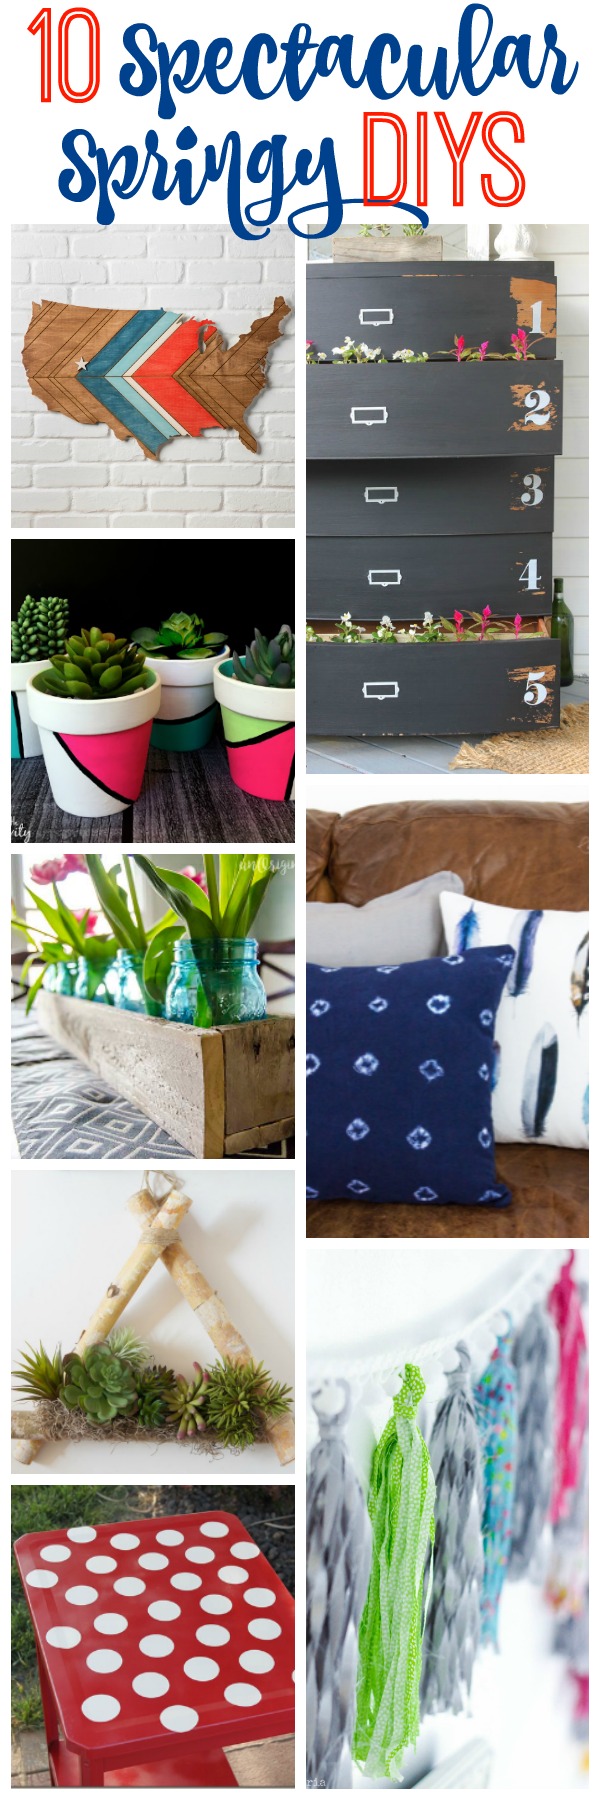 10 Spectacular Springy DIY Projects featured at Work it Wednesday